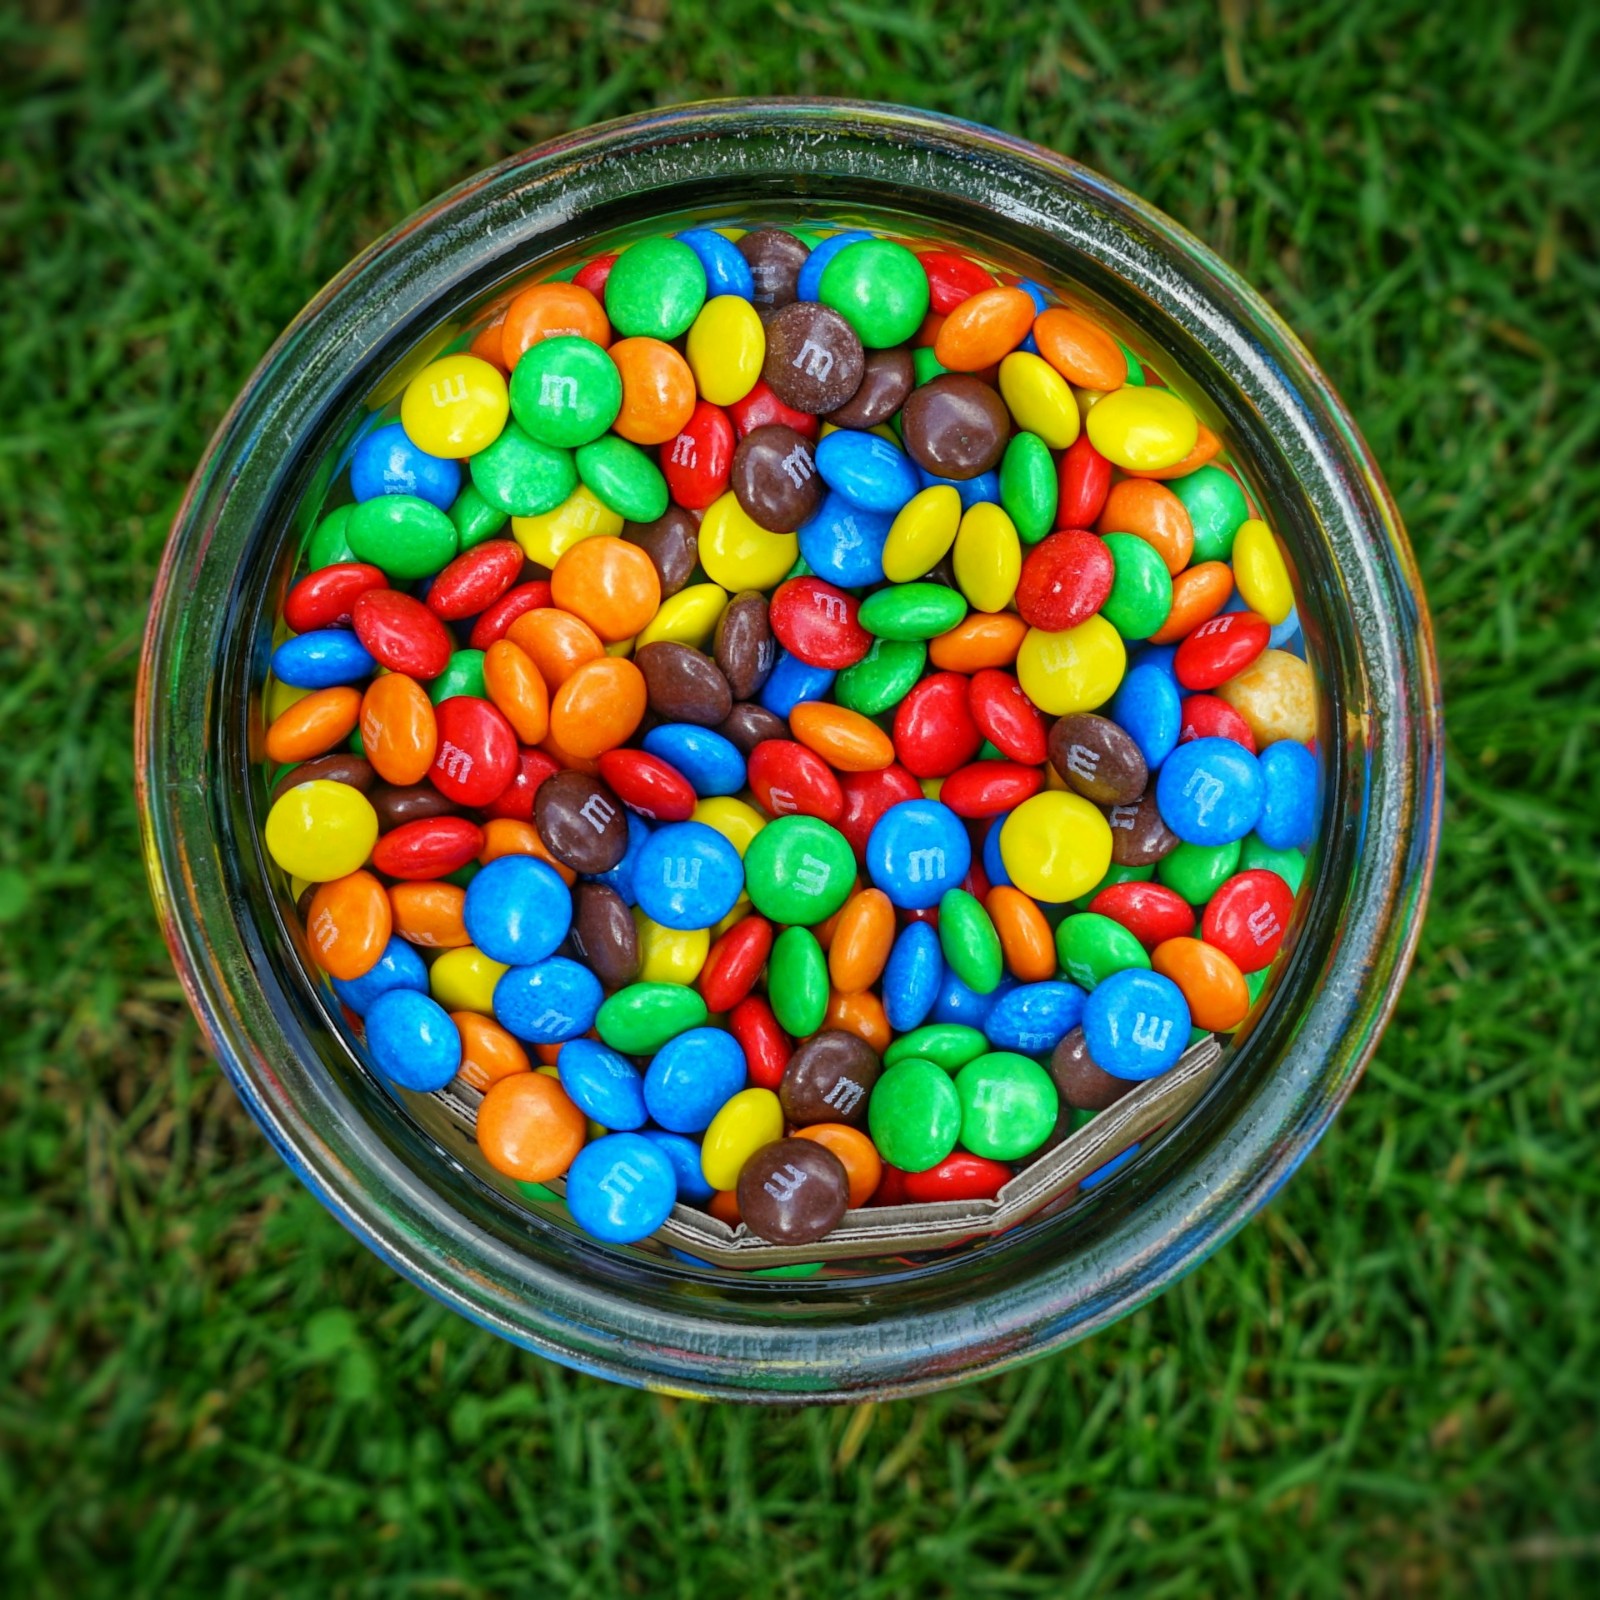 A glass jar filled with M&M's on green grass.